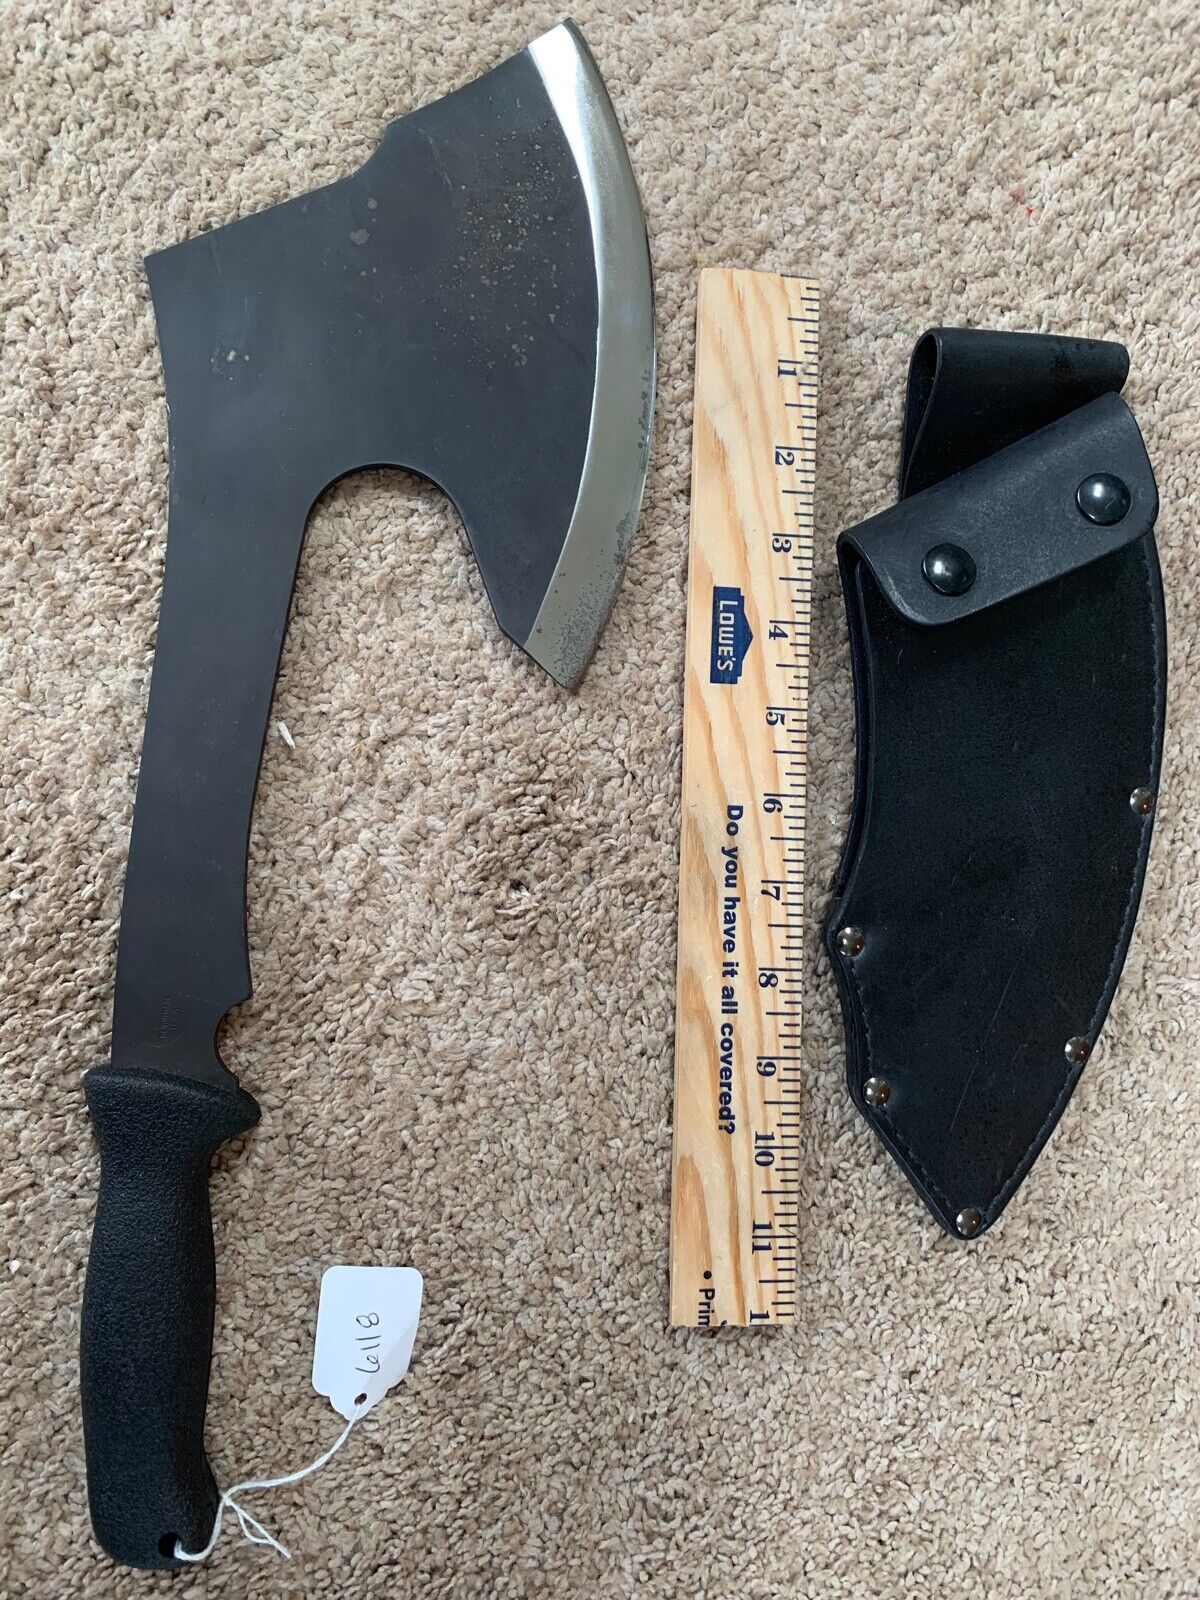 Benchmade knife  Axe/Hatchet early stamp (lot#6118)